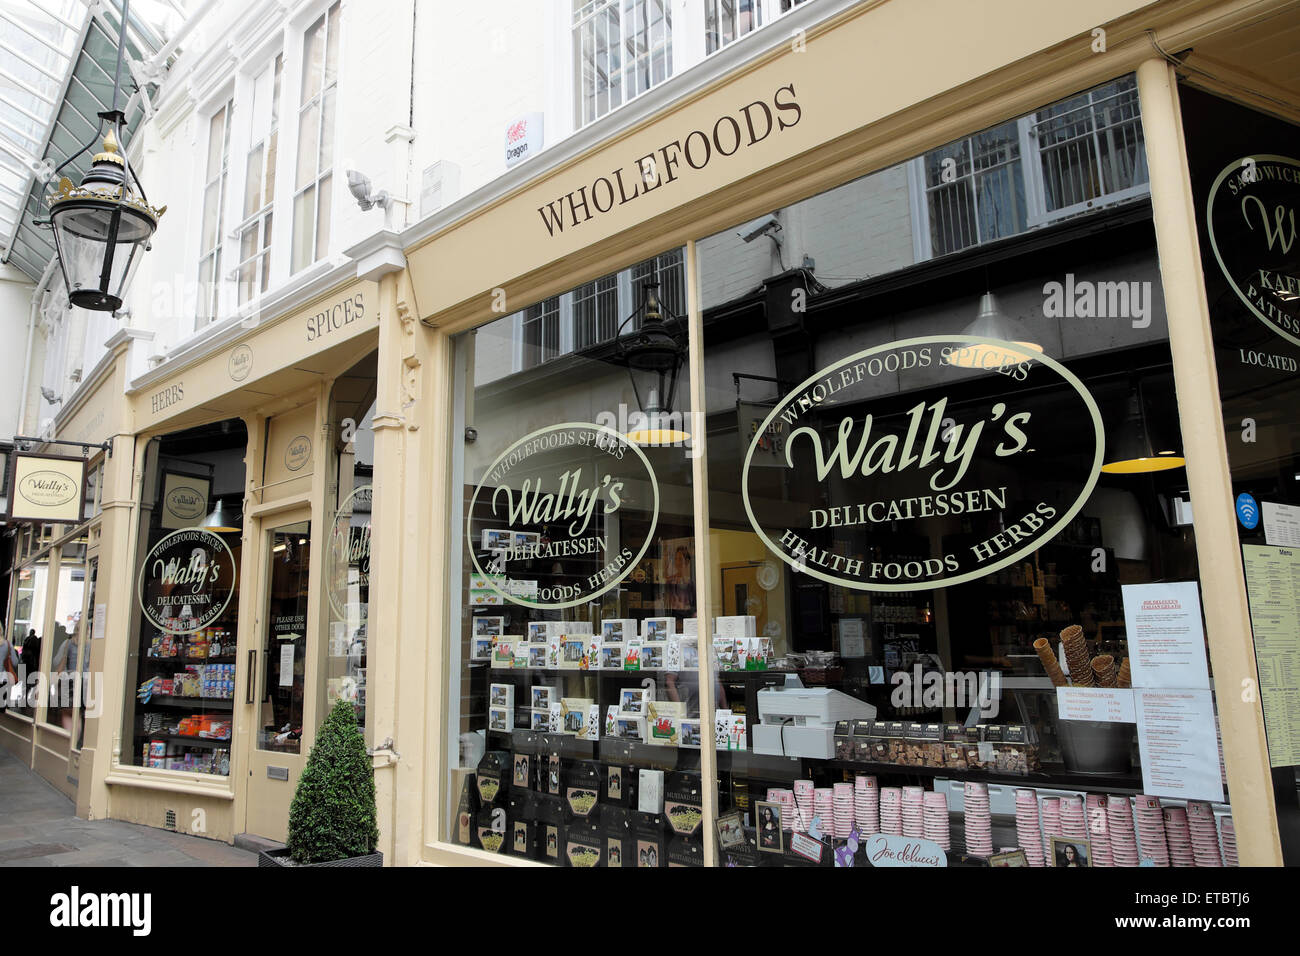 Exterior view of Wally's Delicatessen shop in Royal Arcade in Cardiff City Centre shopping area Wales UK   KATHY DEWITT Stock Photo